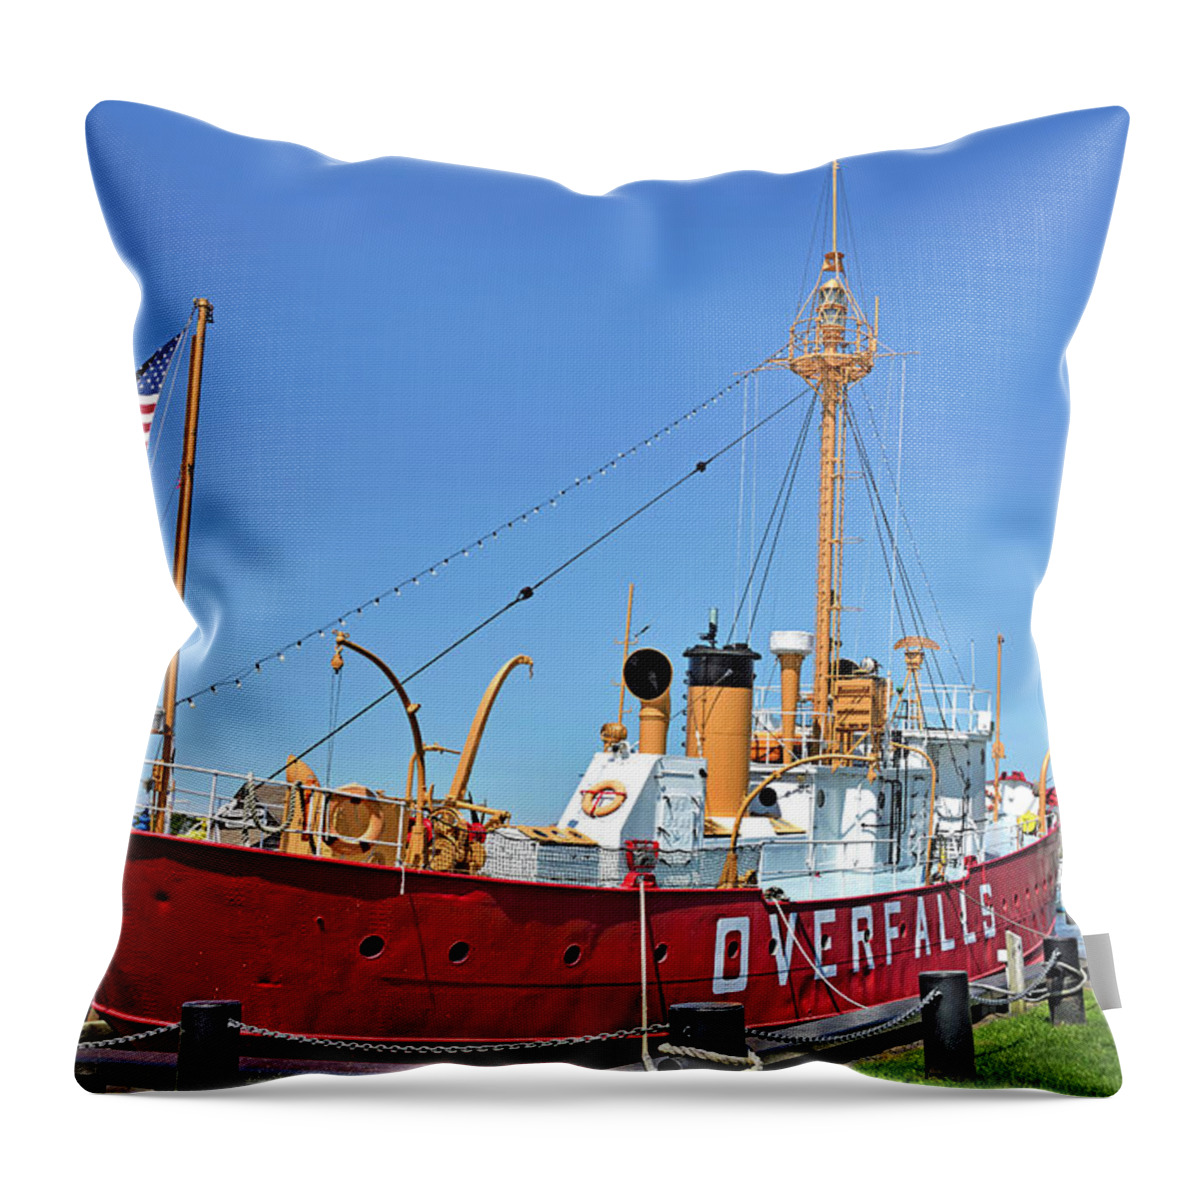 Lightship Overfalls Throw Pillow featuring the photograph Lightship Overfalls Lewes Delaware by Brendan Reals